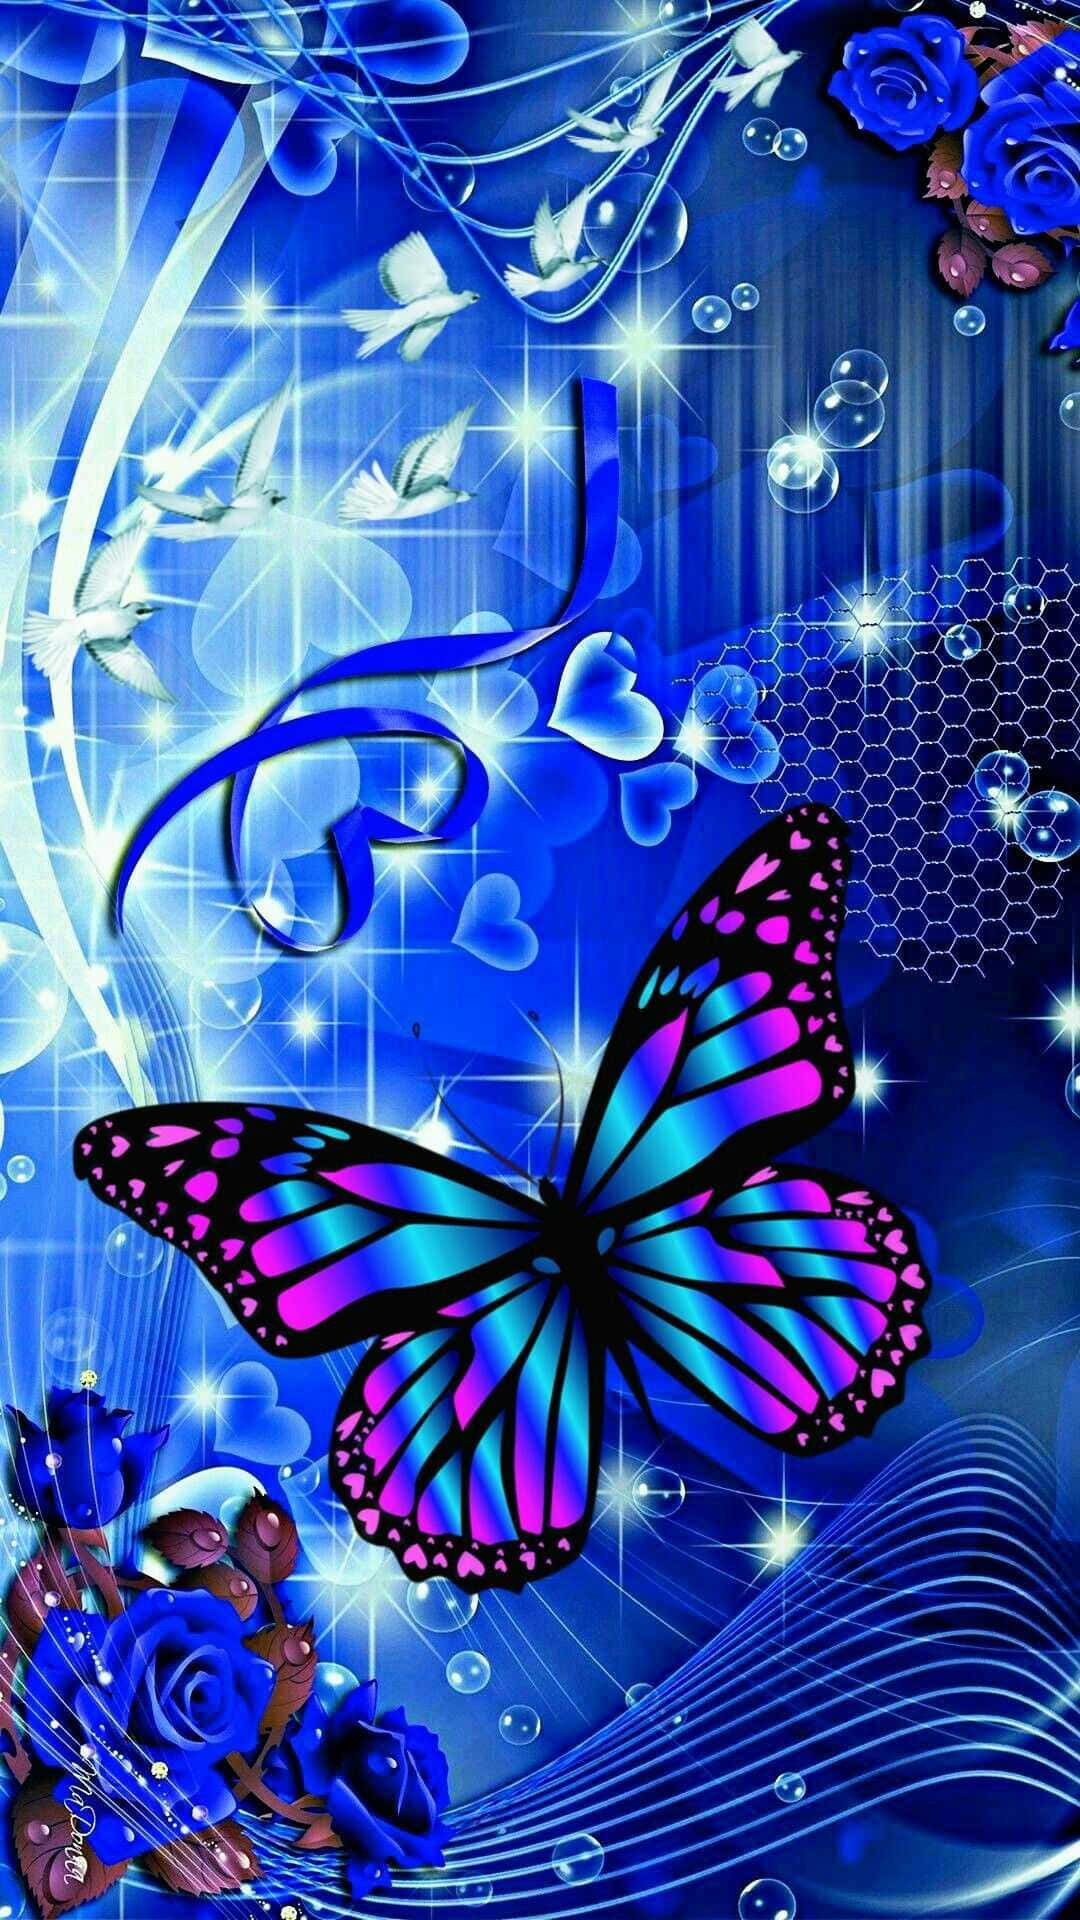 The beauty of color and nature can be found in this Aesthetic Butterfly